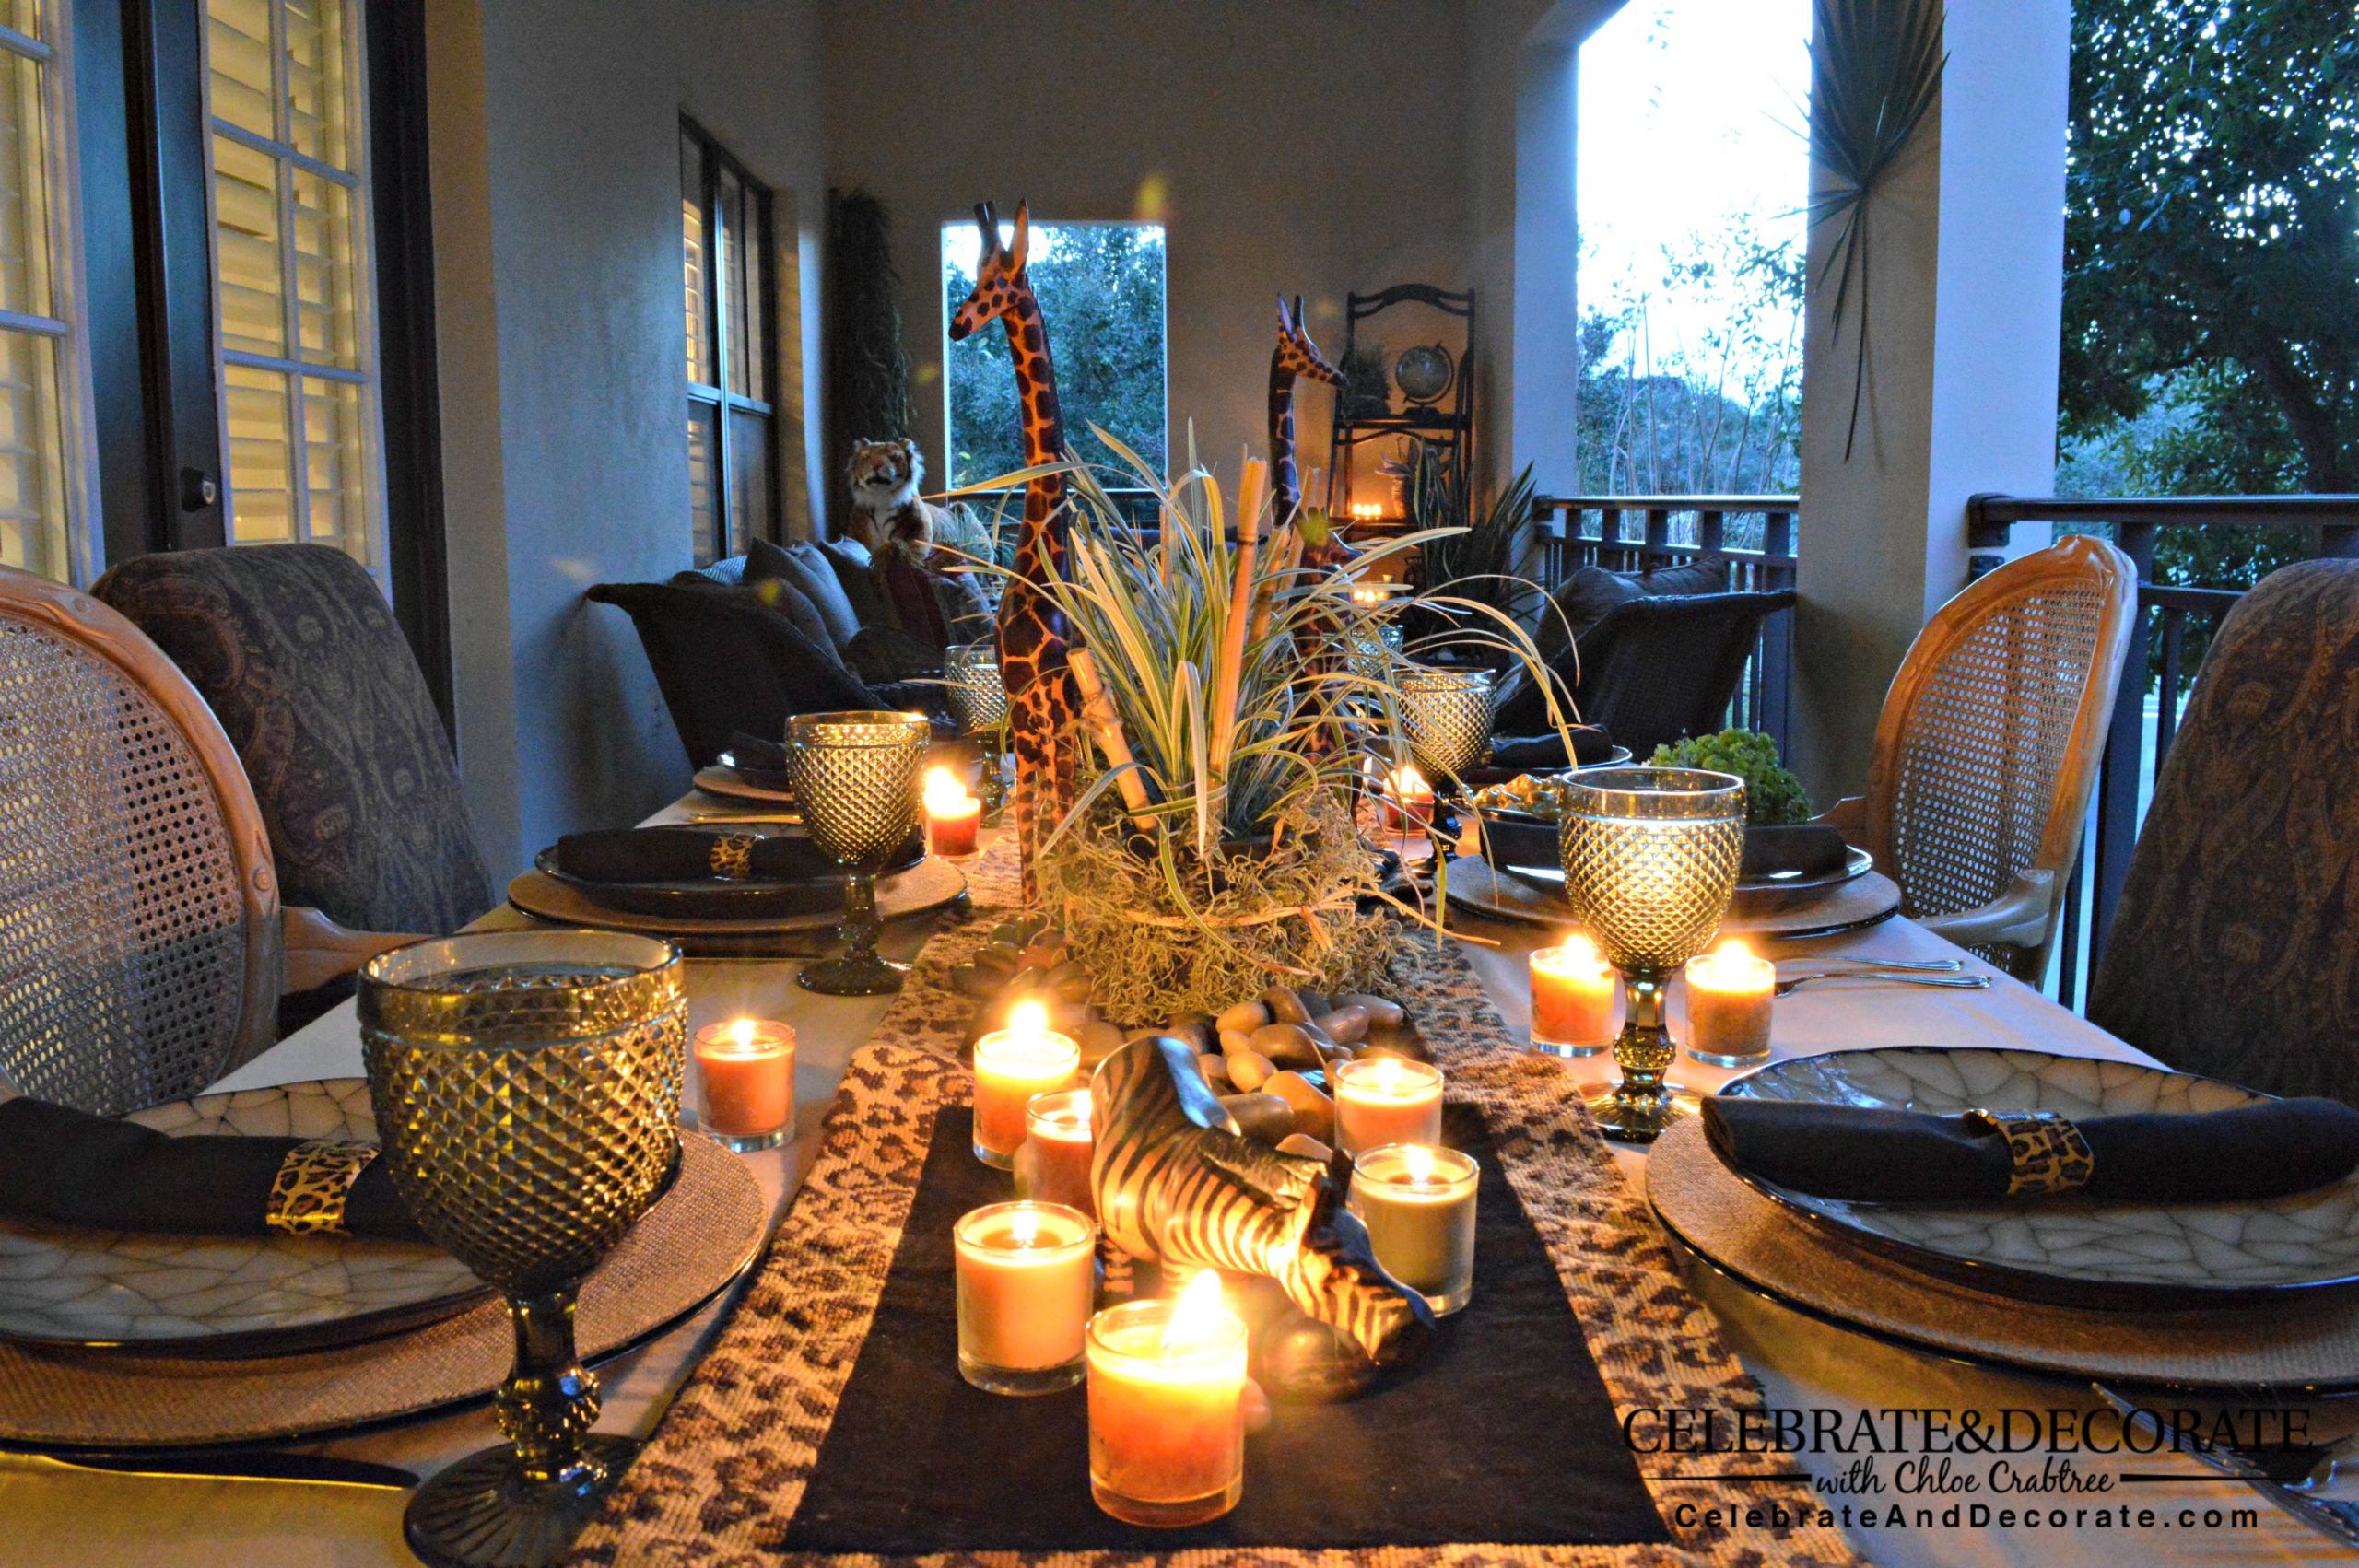 Dinner Party Themes Ideas
 Safari Party or Jungle party perfect for an outdoor summer